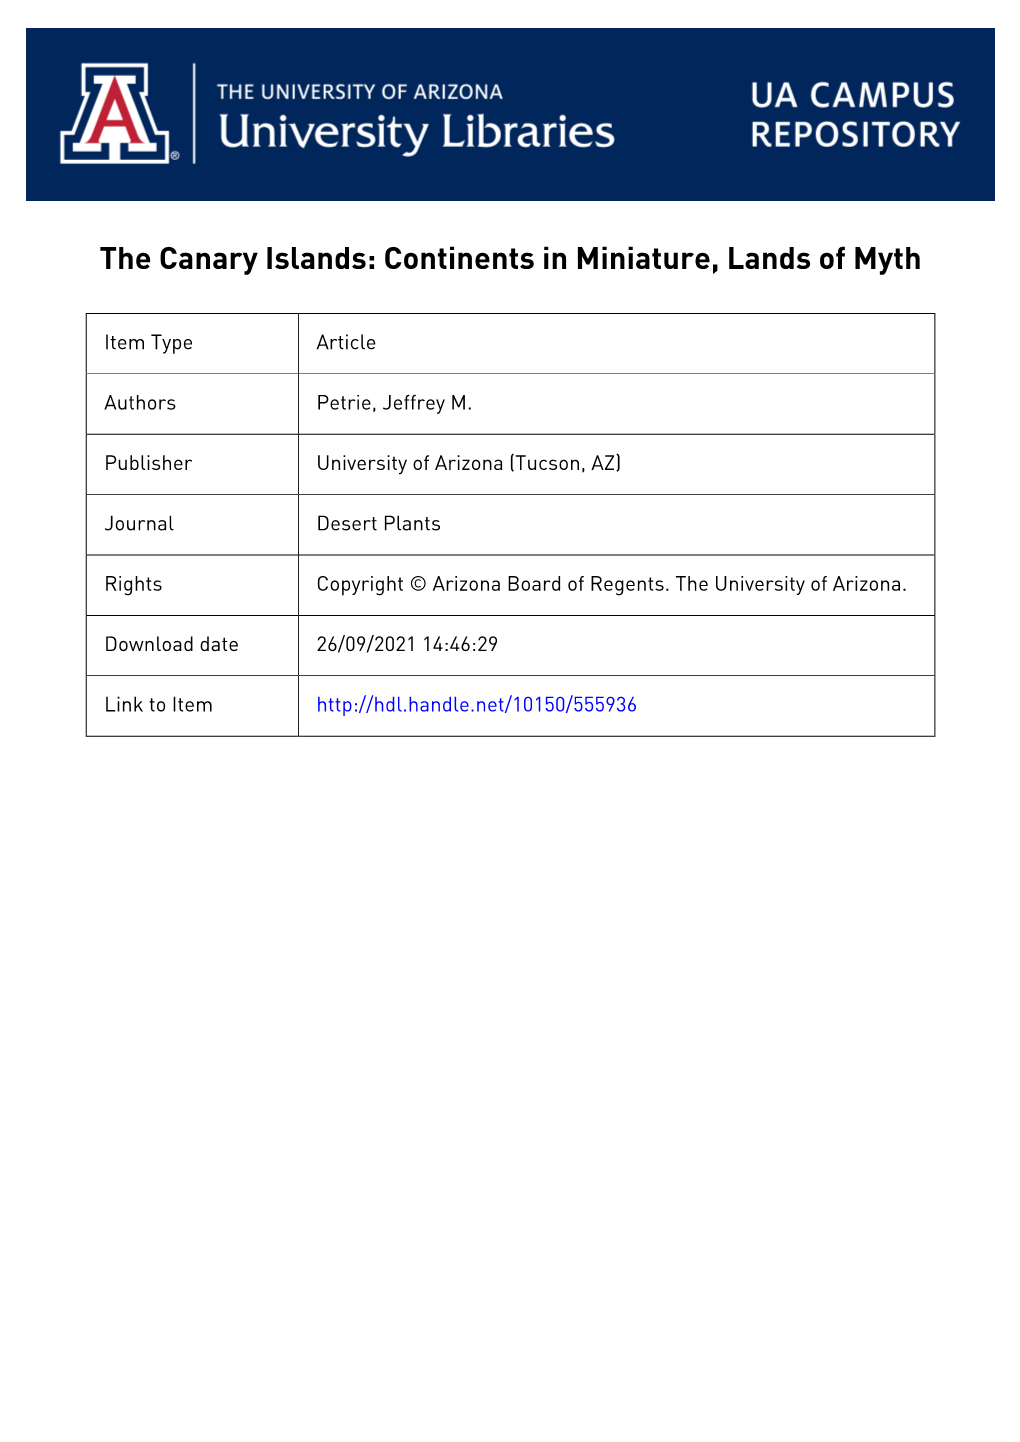 The Canary Islands: Continents in Miniature, Lands of Myth